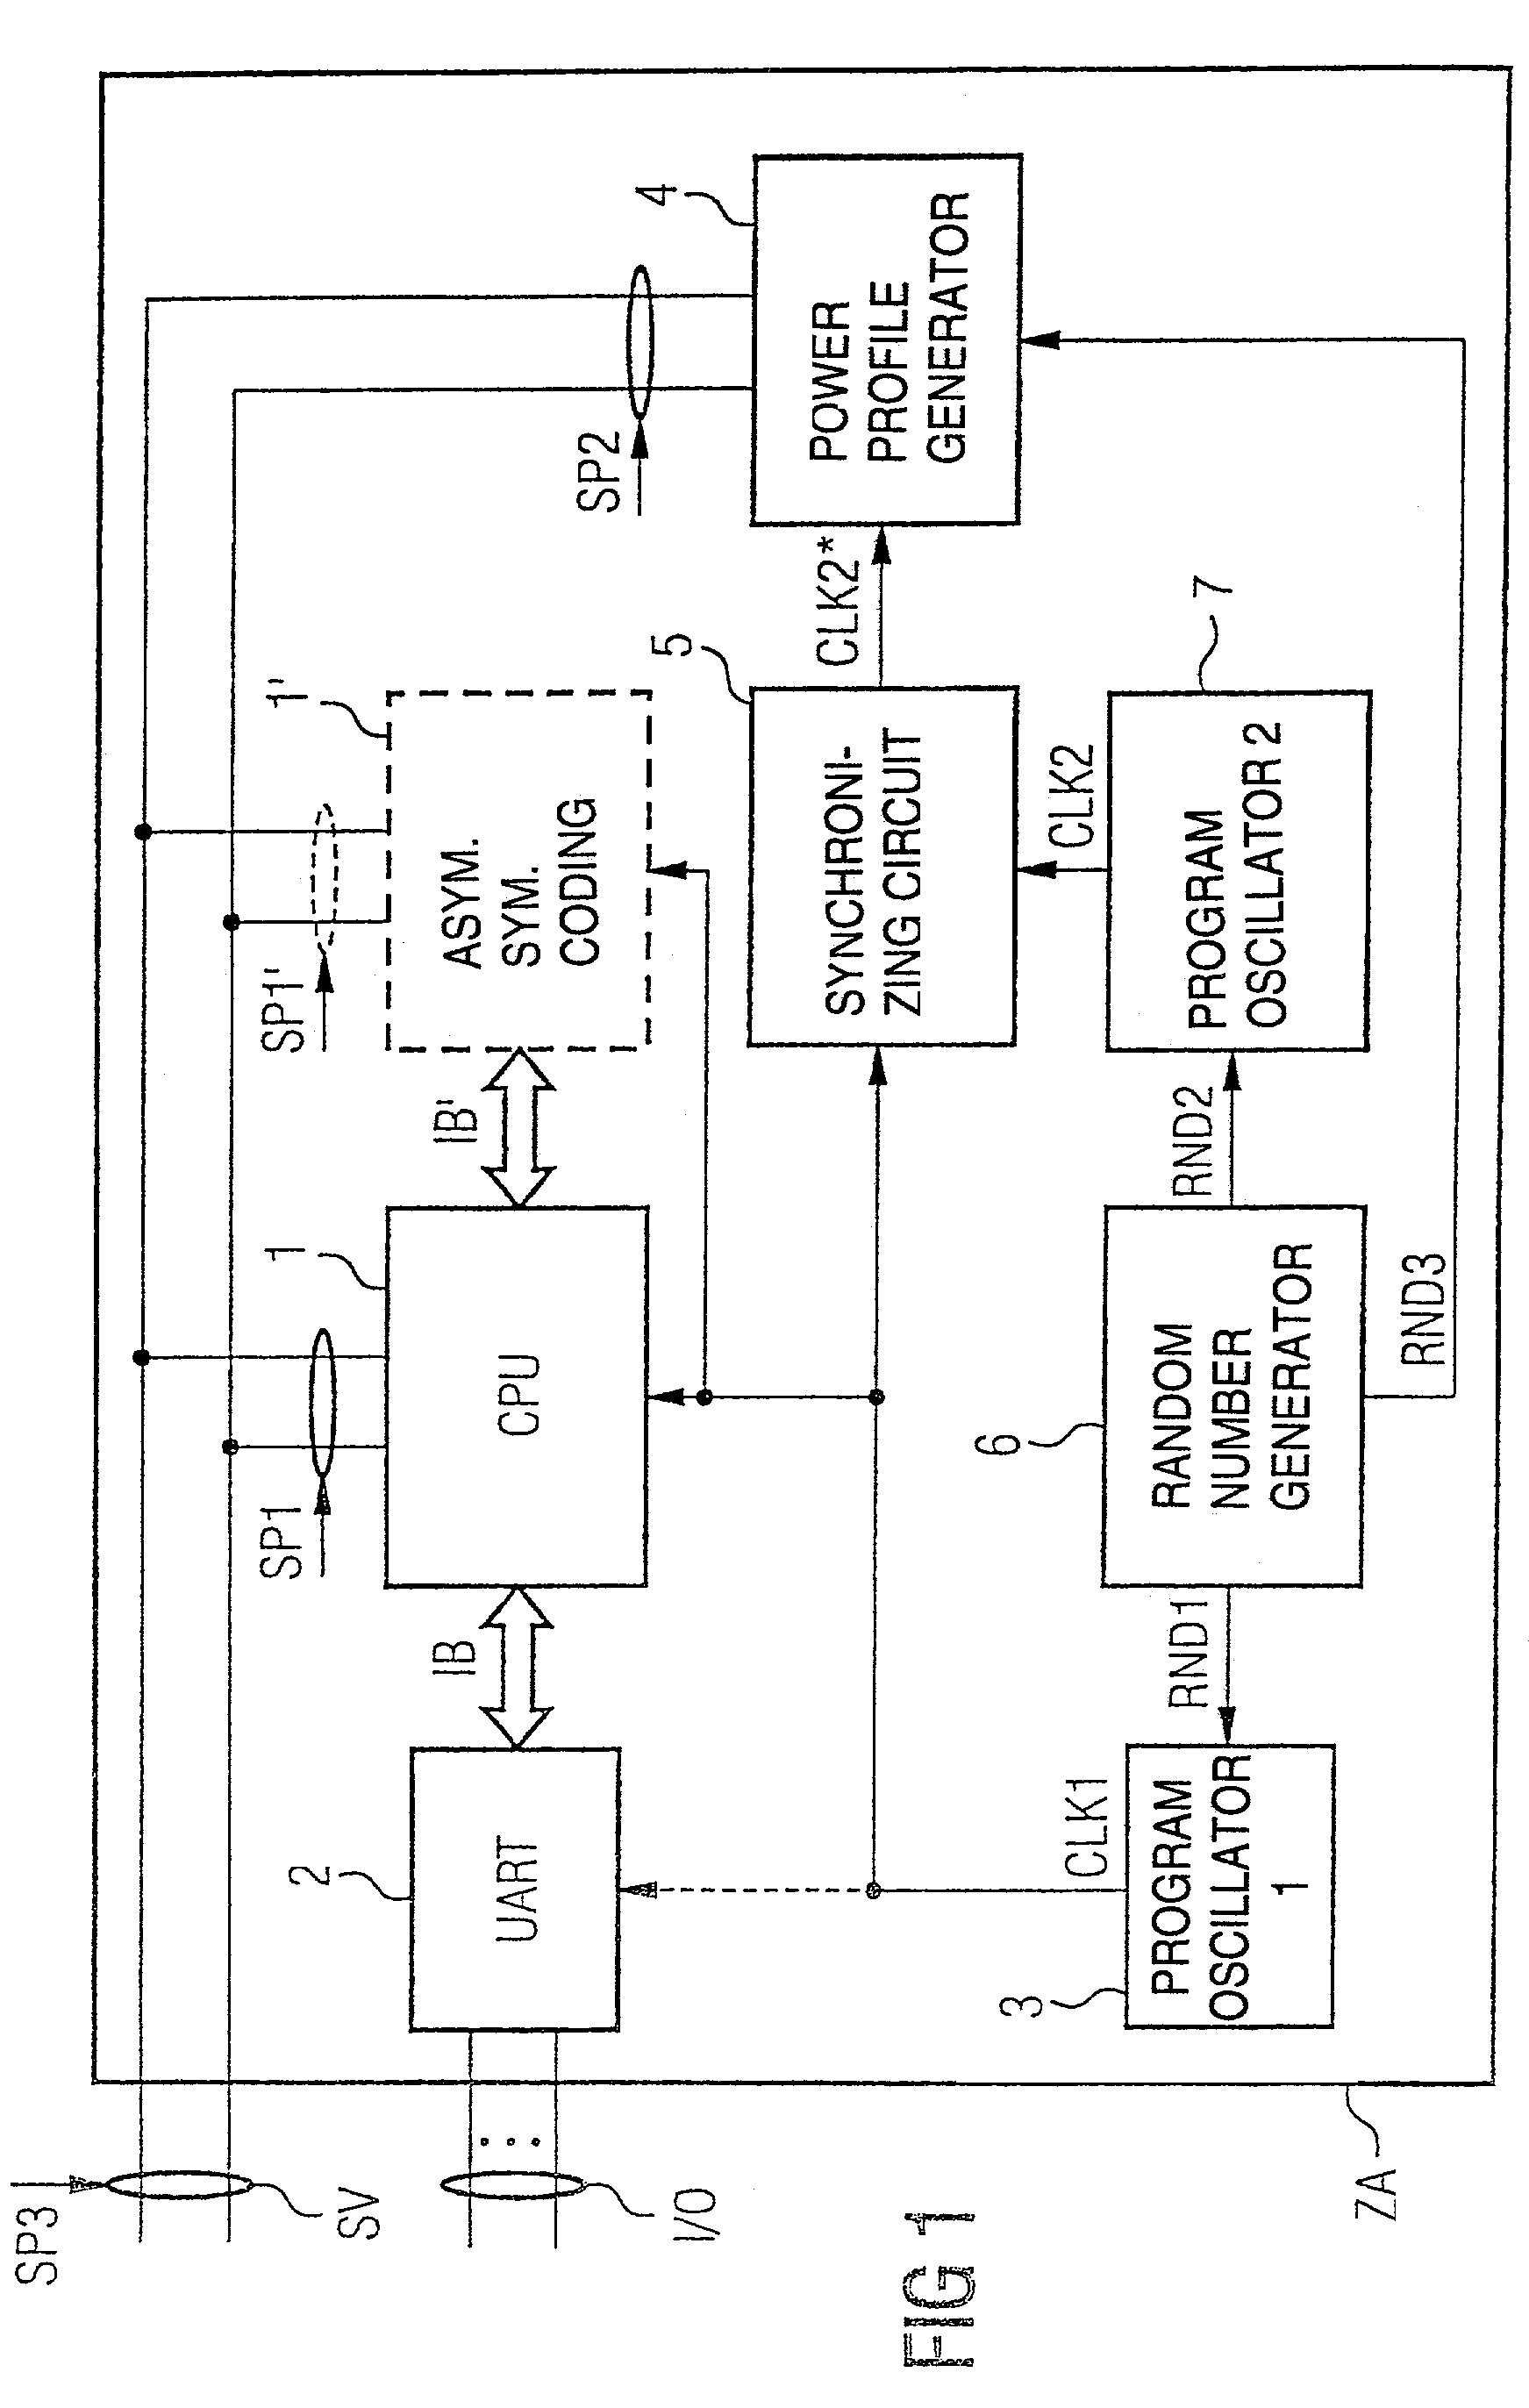 Power analysis resistant coding device